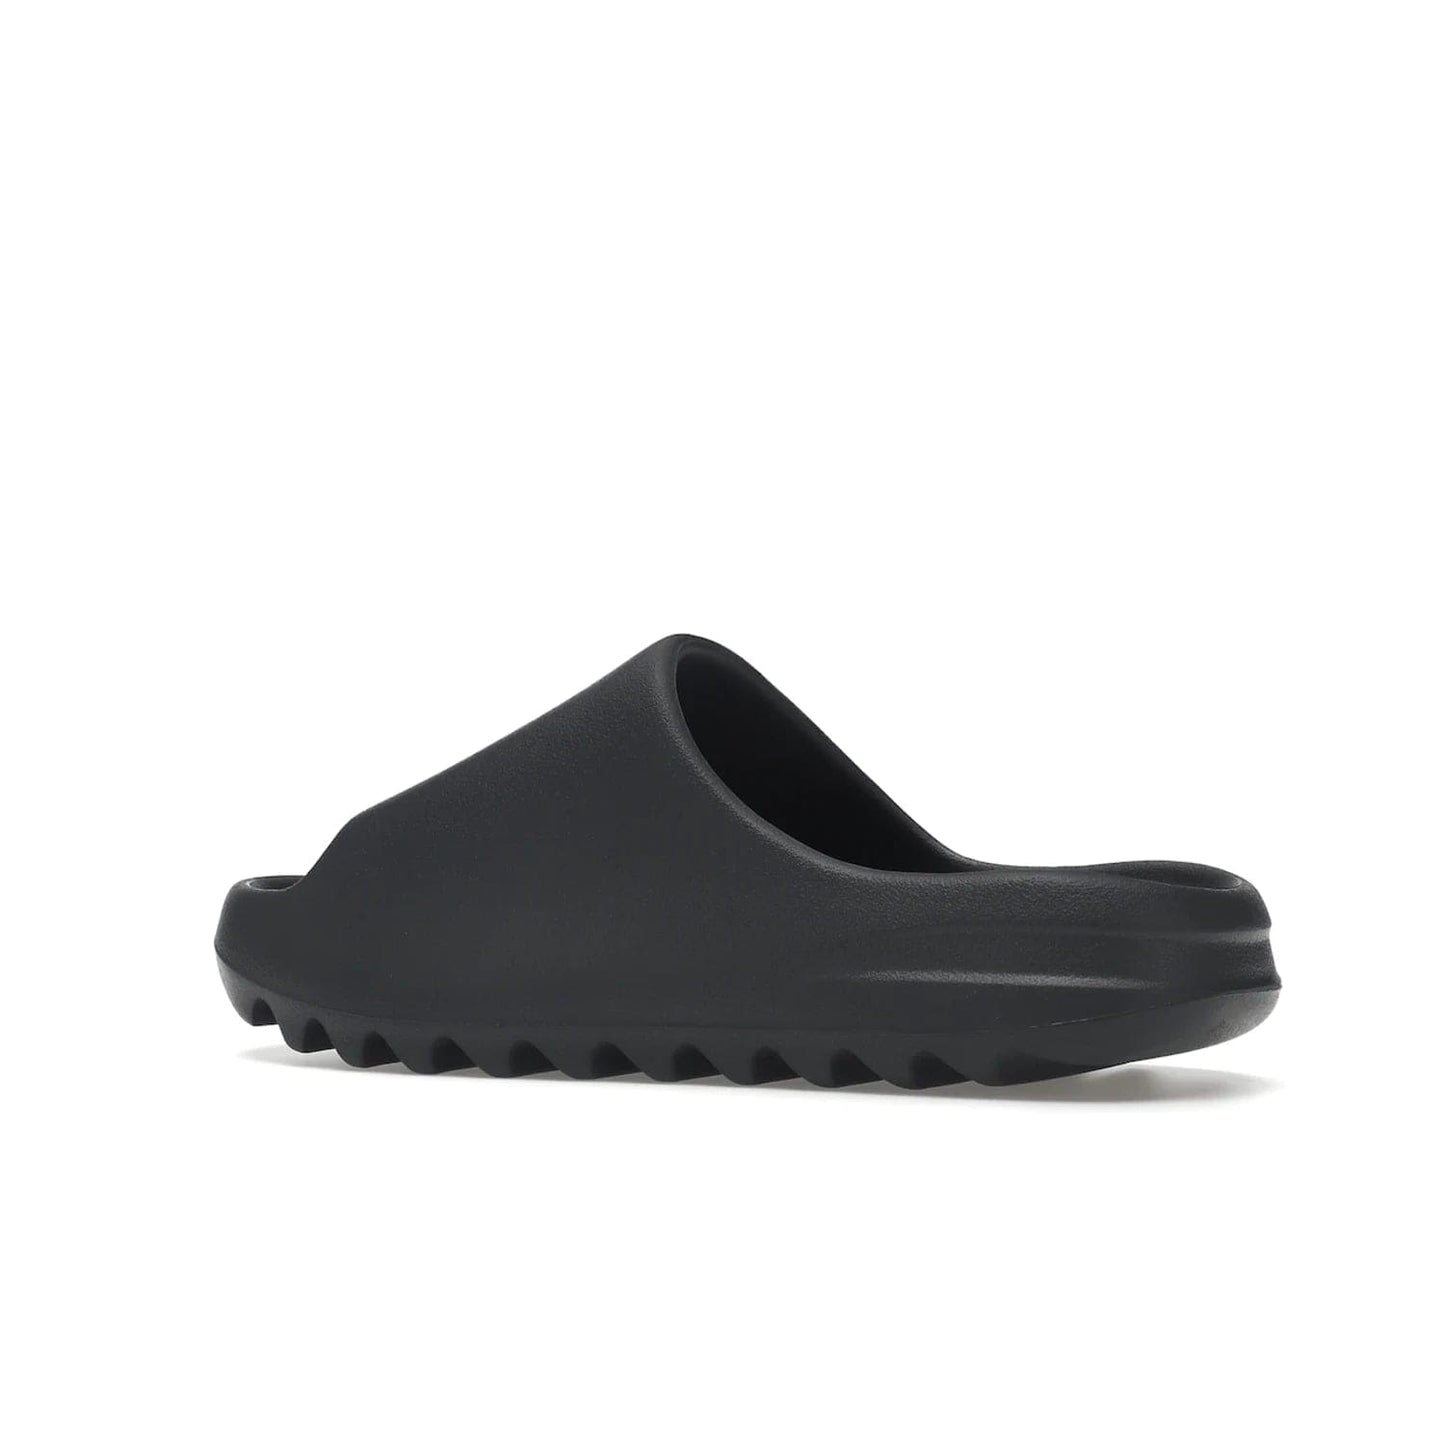 adidas Yeezy Slide Slate Grey - Image 22 - Only at www.BallersClubKickz.com - Stylish & comfortable adidas Yeezy Slide Slate Grey features an EVA foam upper, strategic cutouts, textured outsole pattern, & easy slip-on design for modern comfort & classic style.